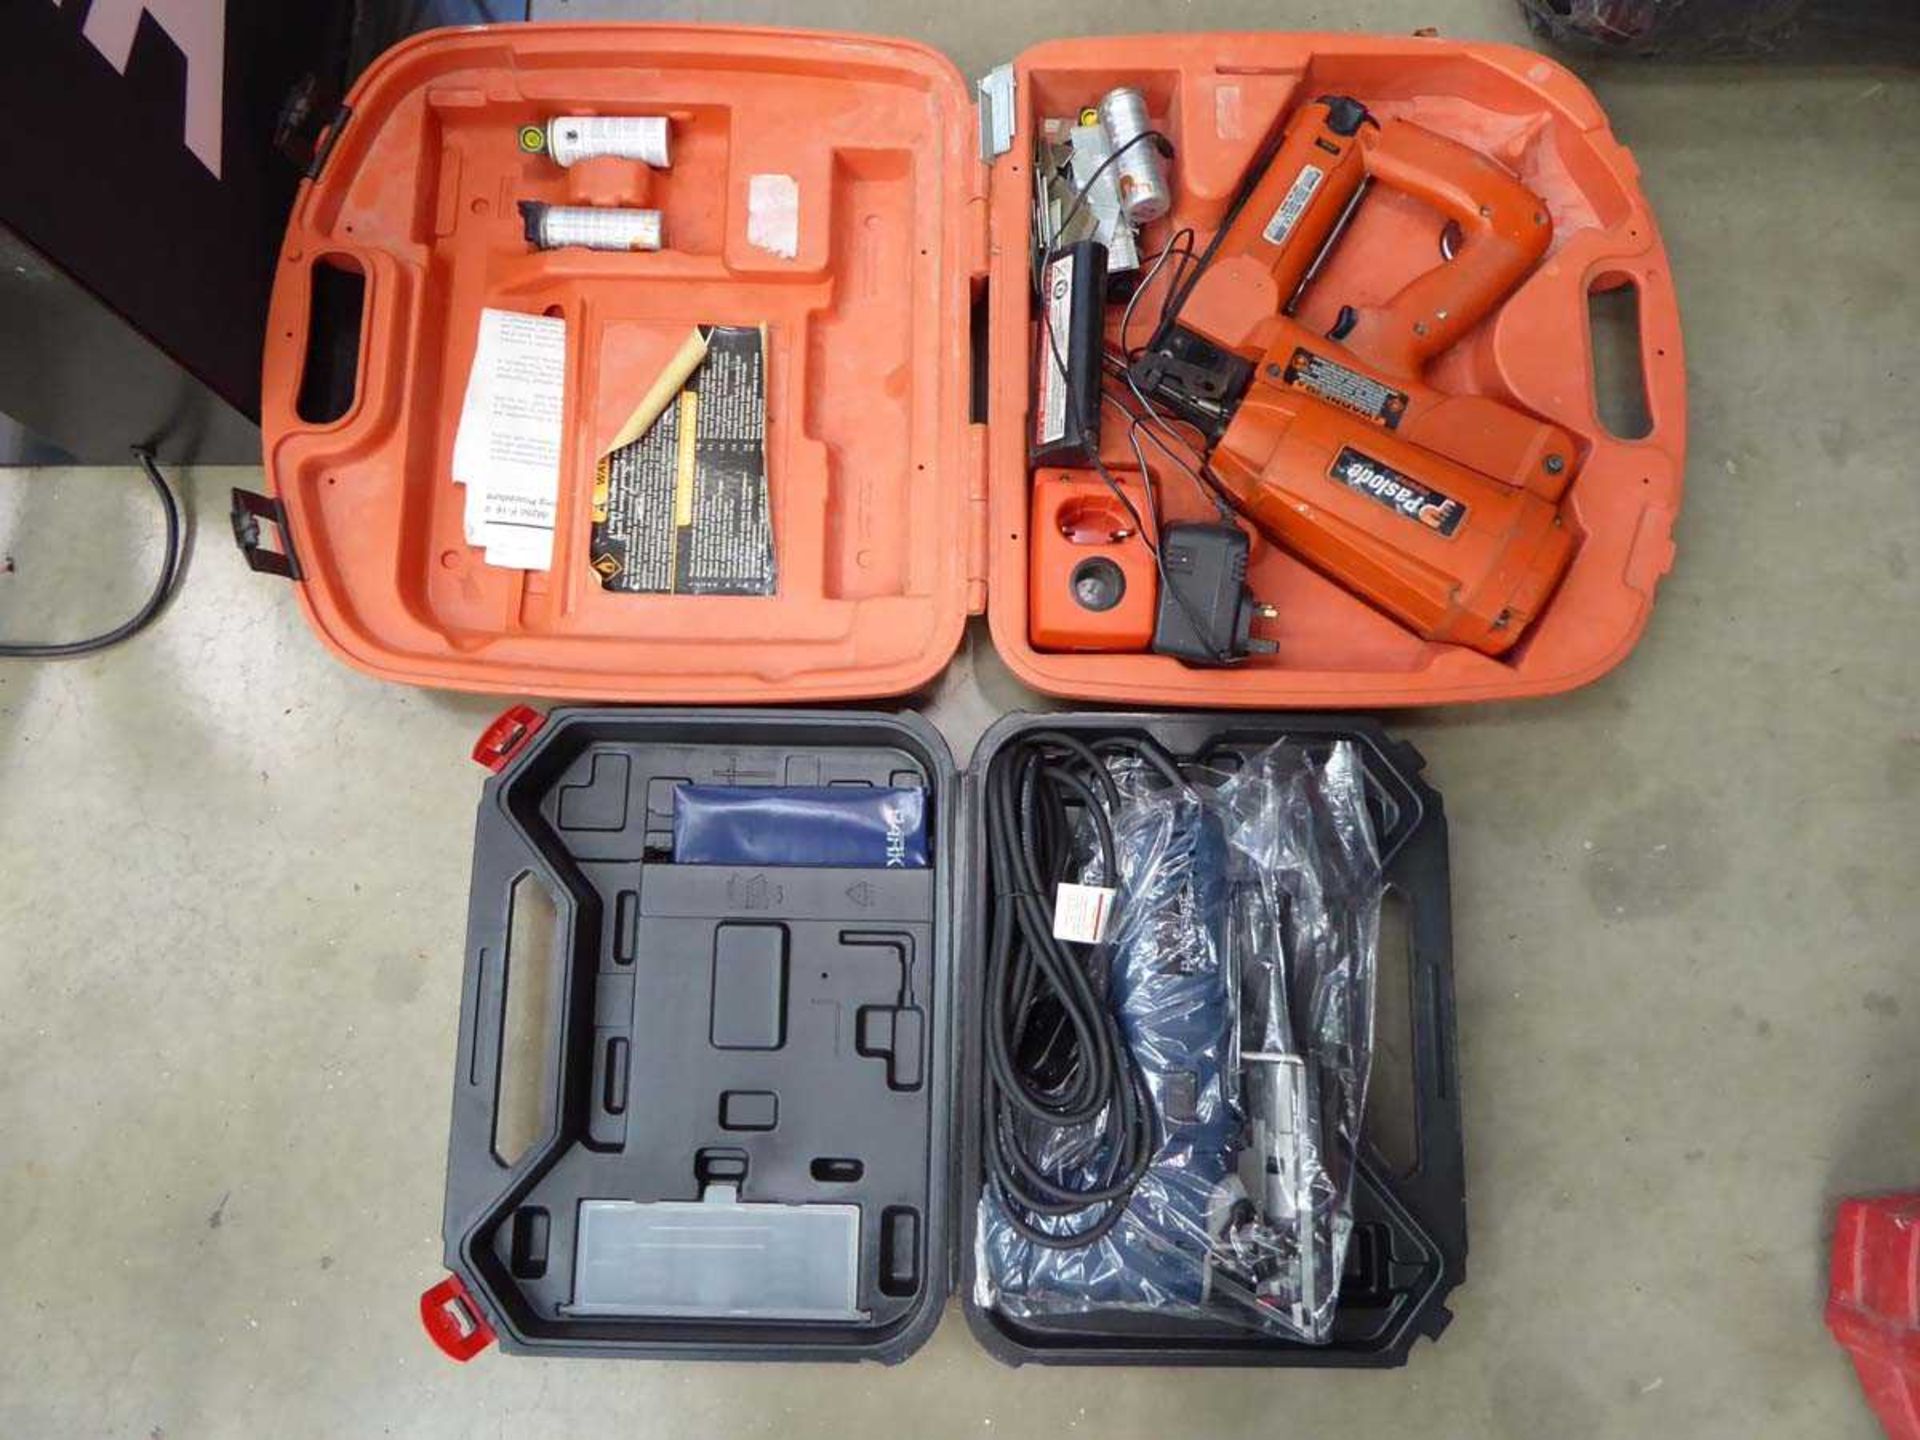 Paslode nail gun with battery and charger and a Parkside jigsaw